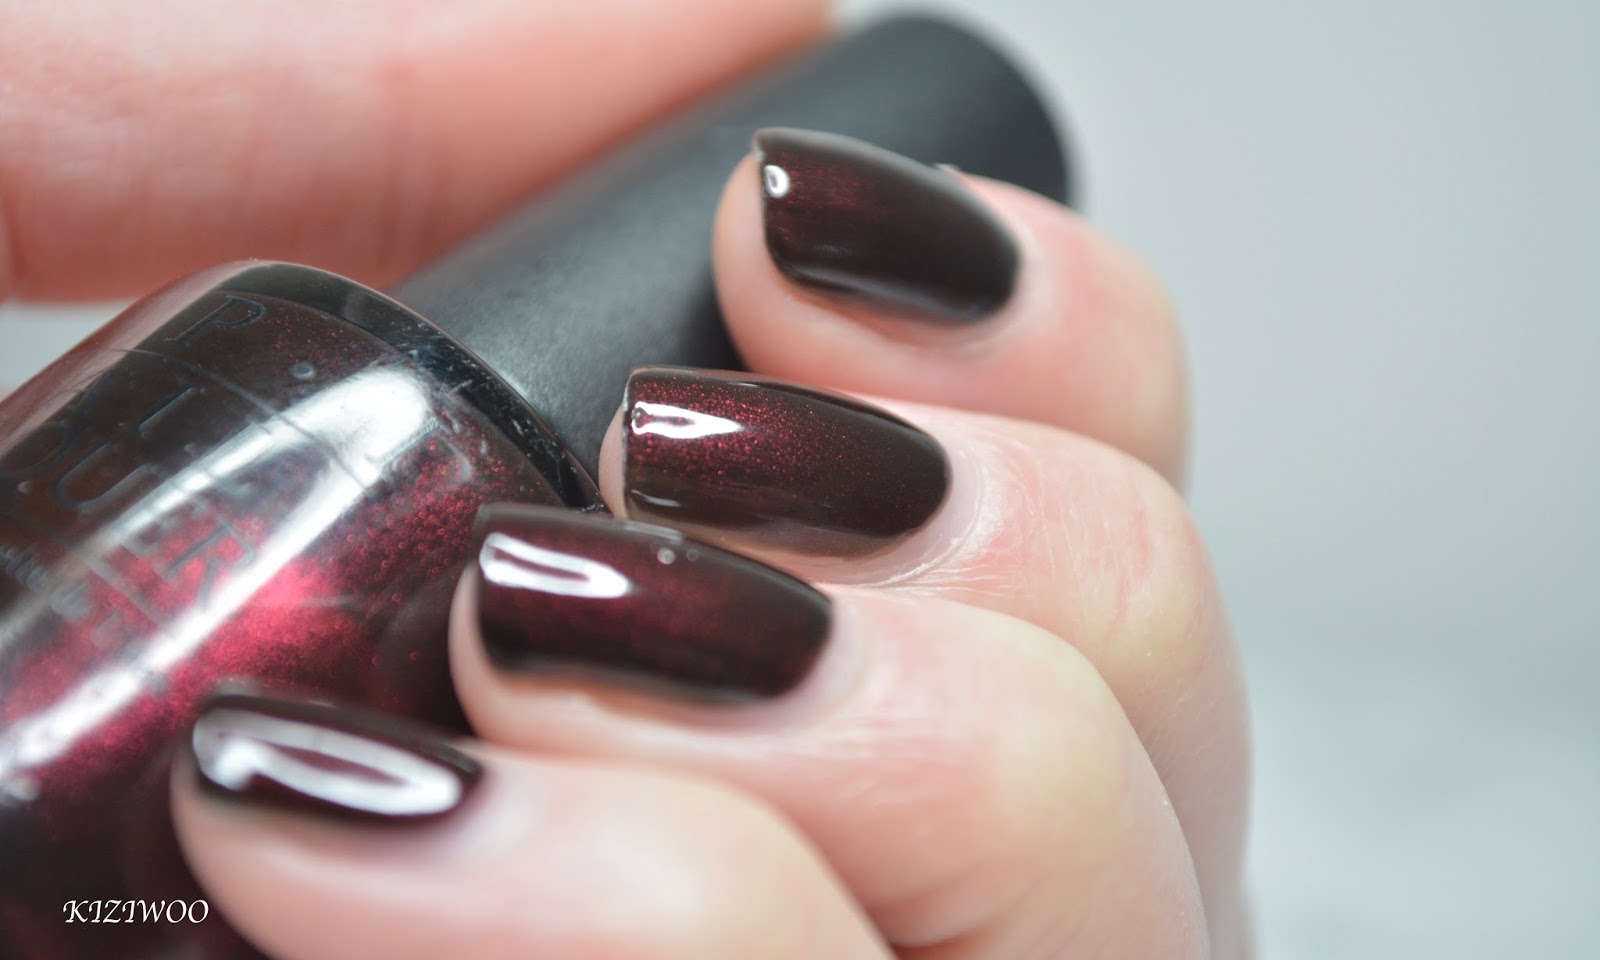 5. OPI Midnight in Moscow - wide 2